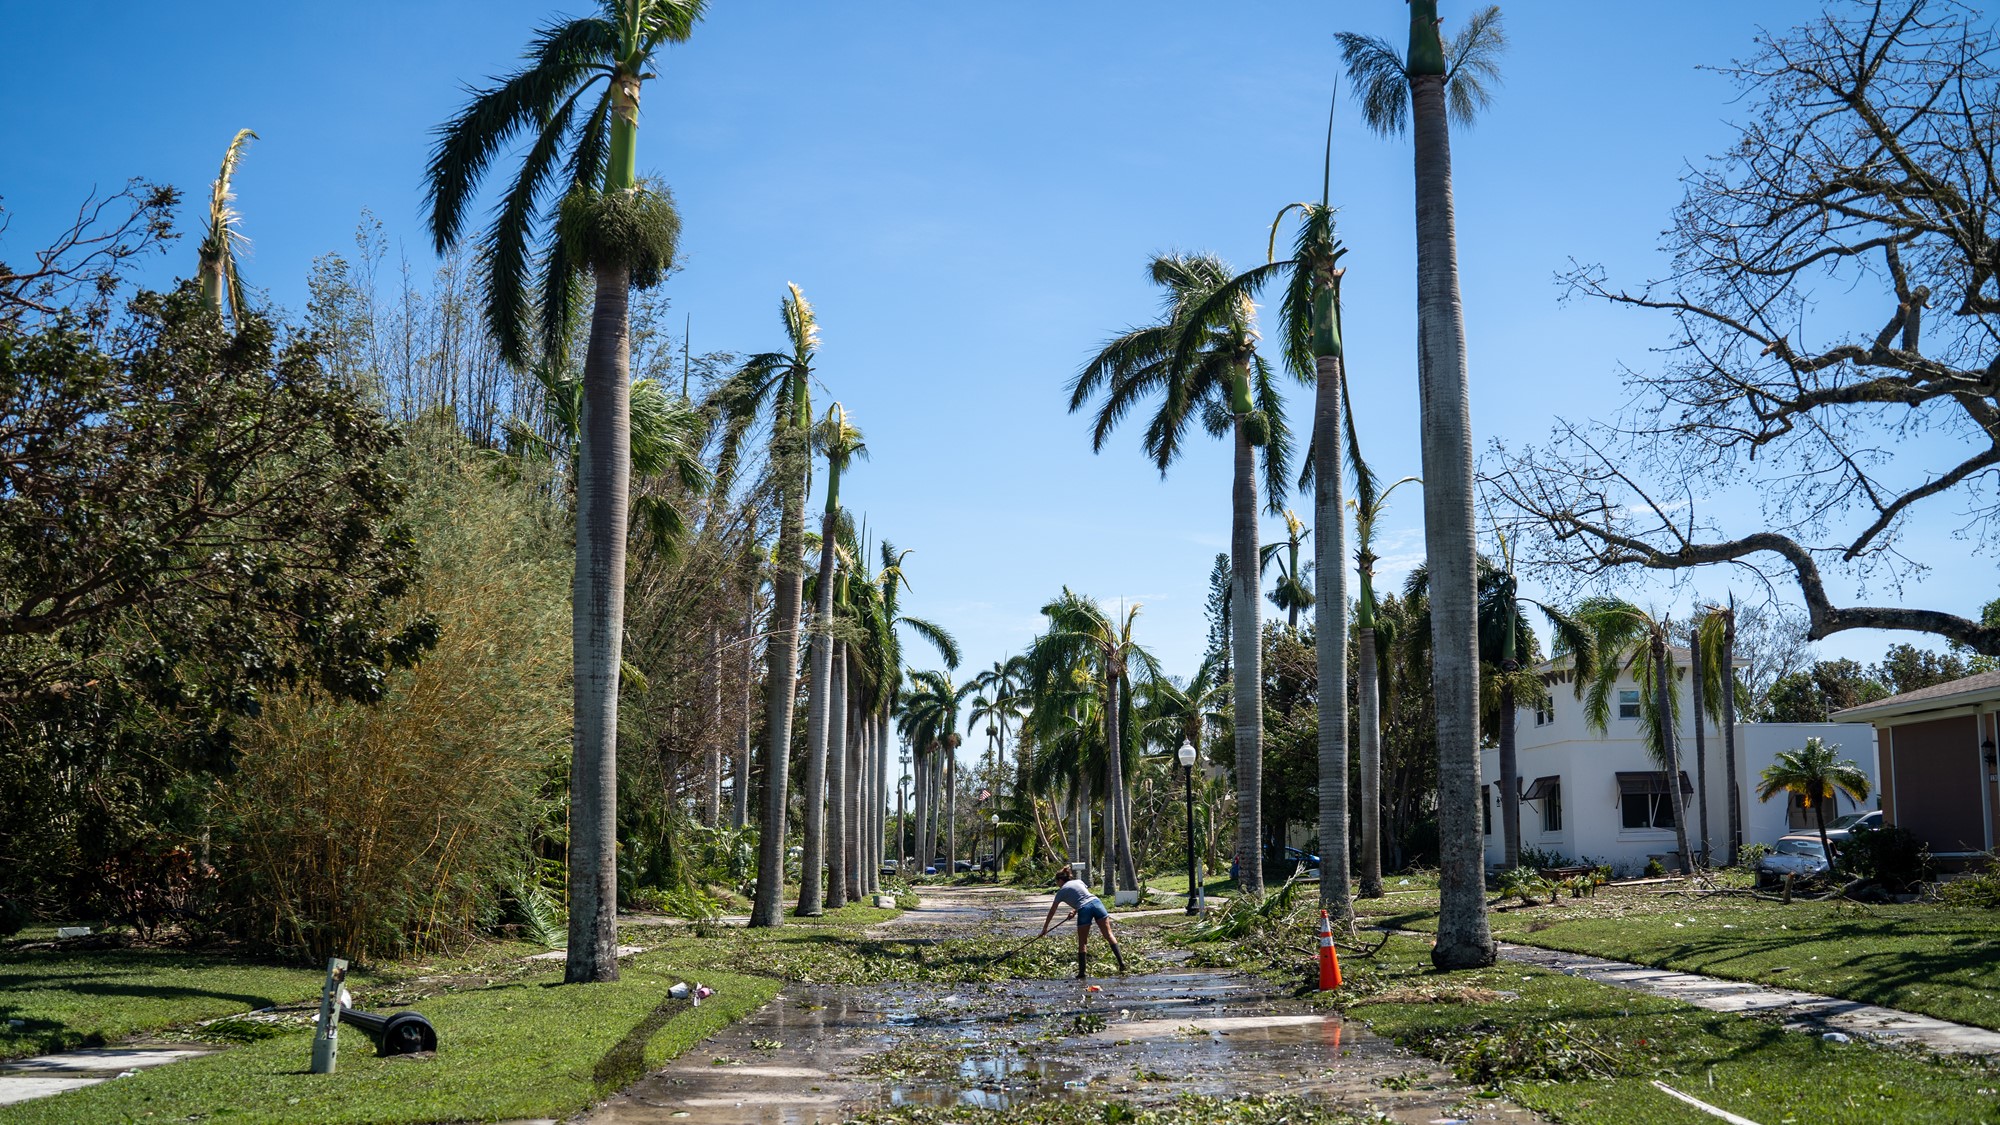 A woman cleans a street lined by palm trees and green waste.